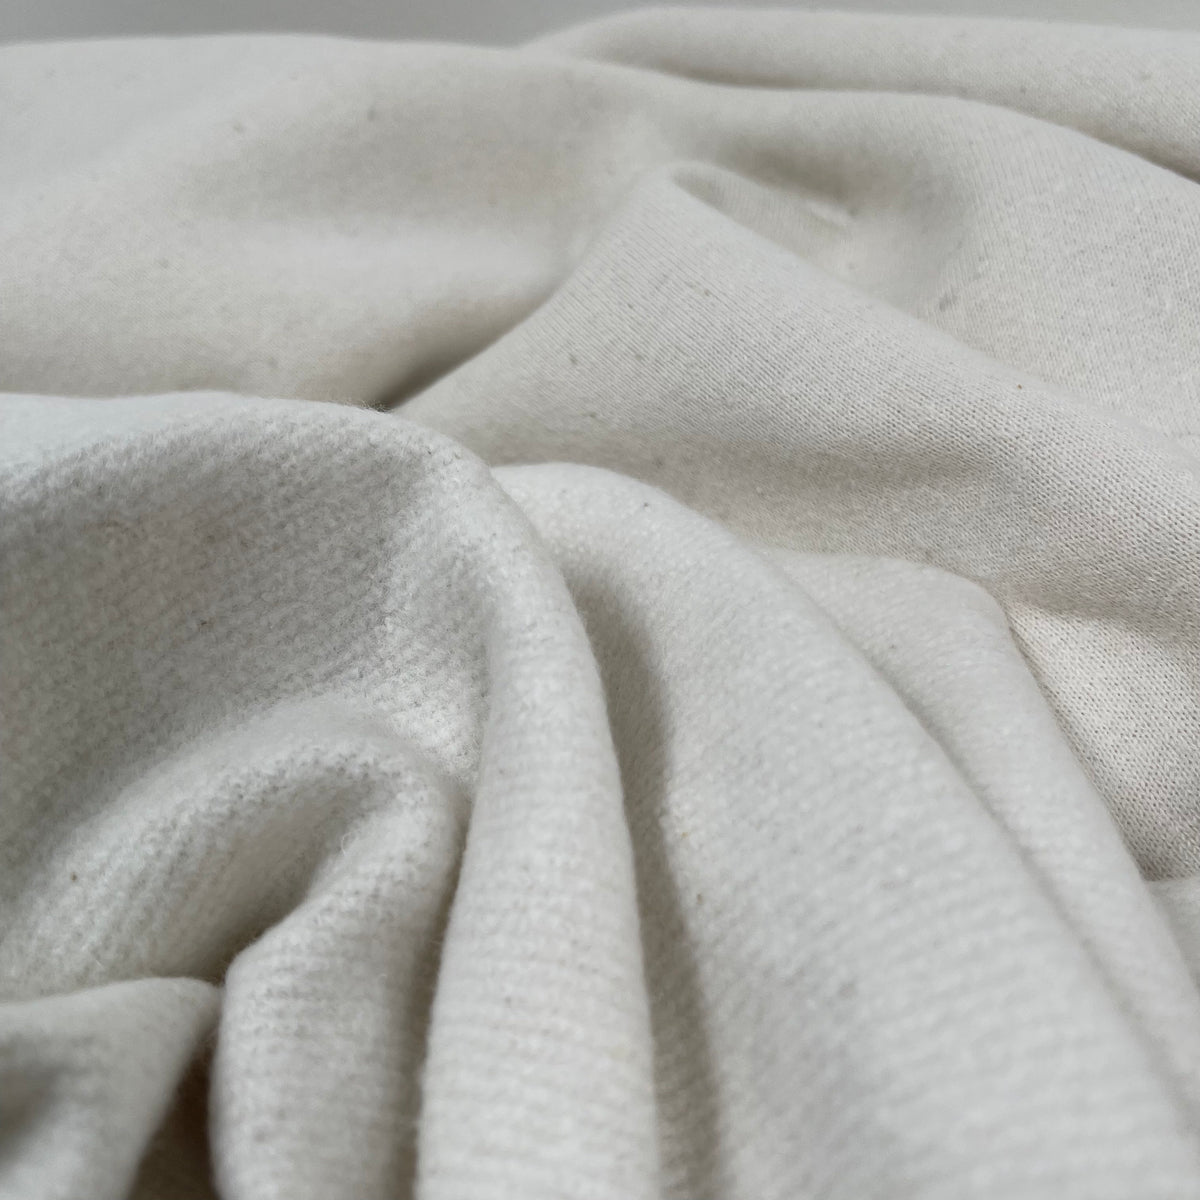 Organic Cotton Canvas - Unfinished Natural/undyed *NEW